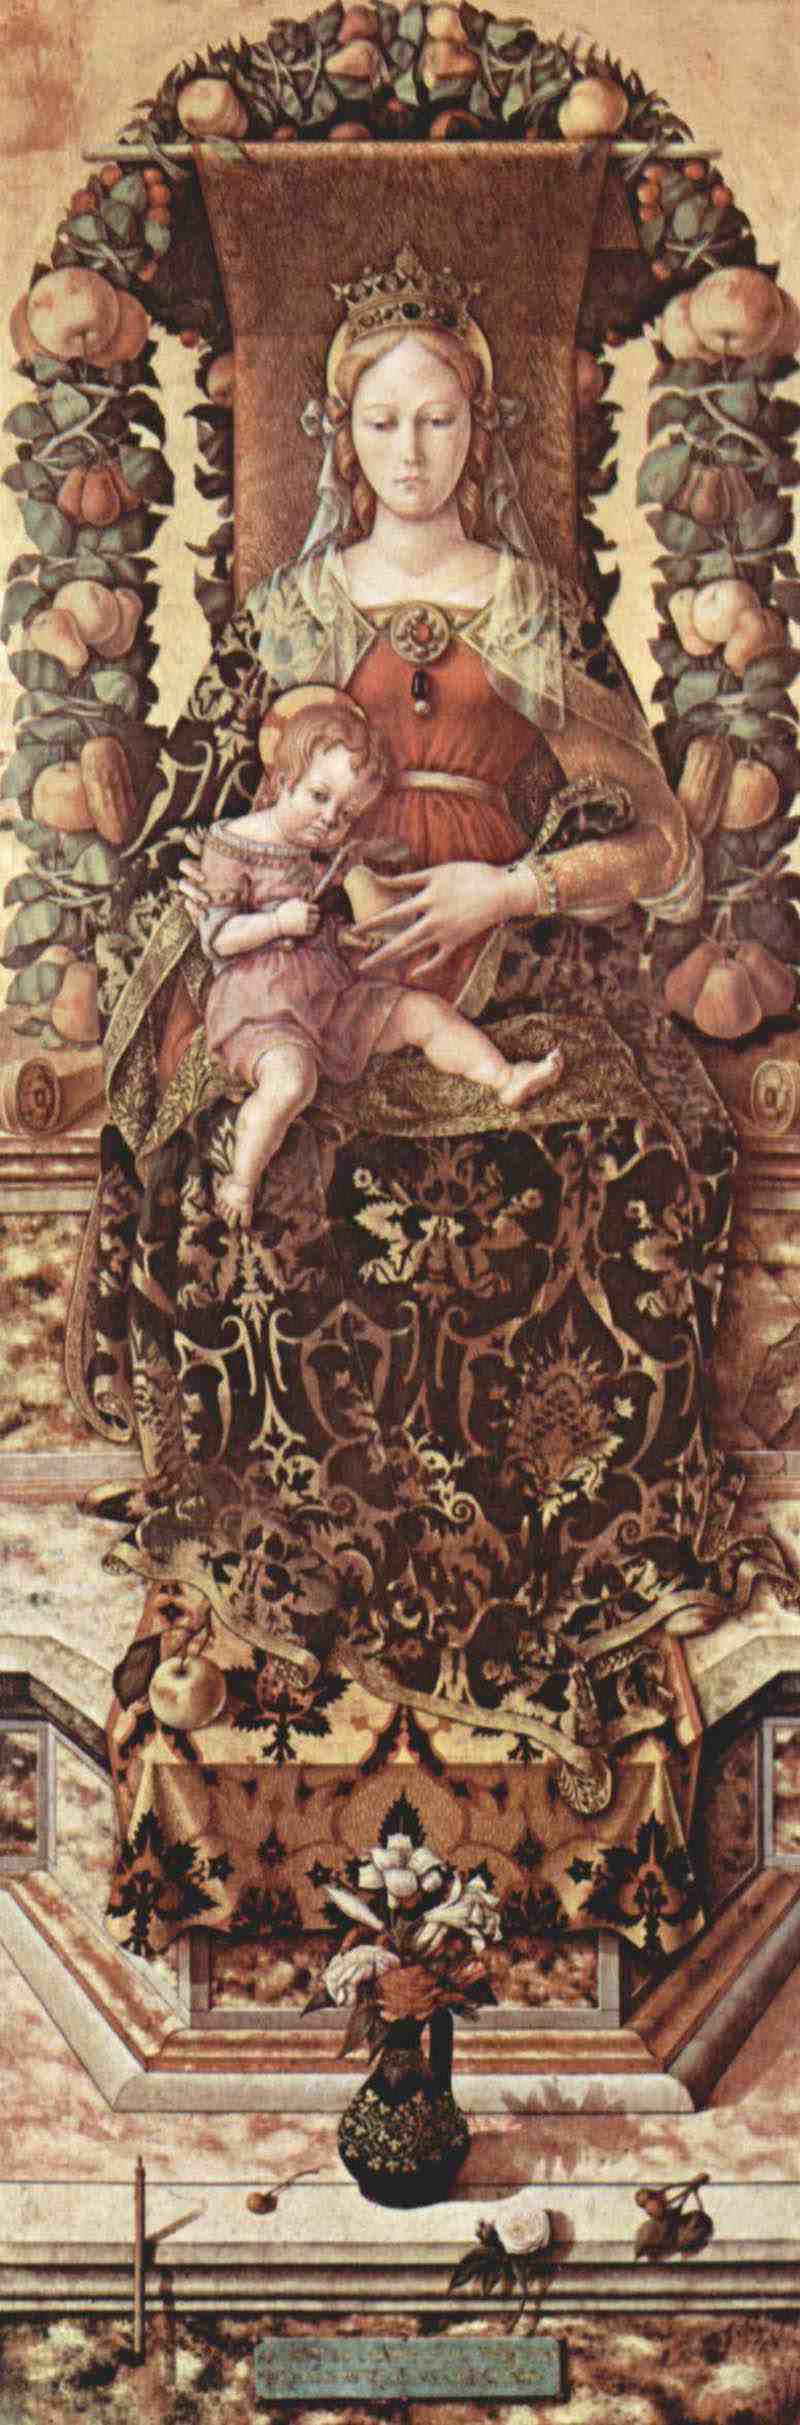 Altar of the Cathedral of Camerino, Madonna della Candeletta scene: enthroned Madonna and extinct candle at the foot of the throne. Carlo Crivelli